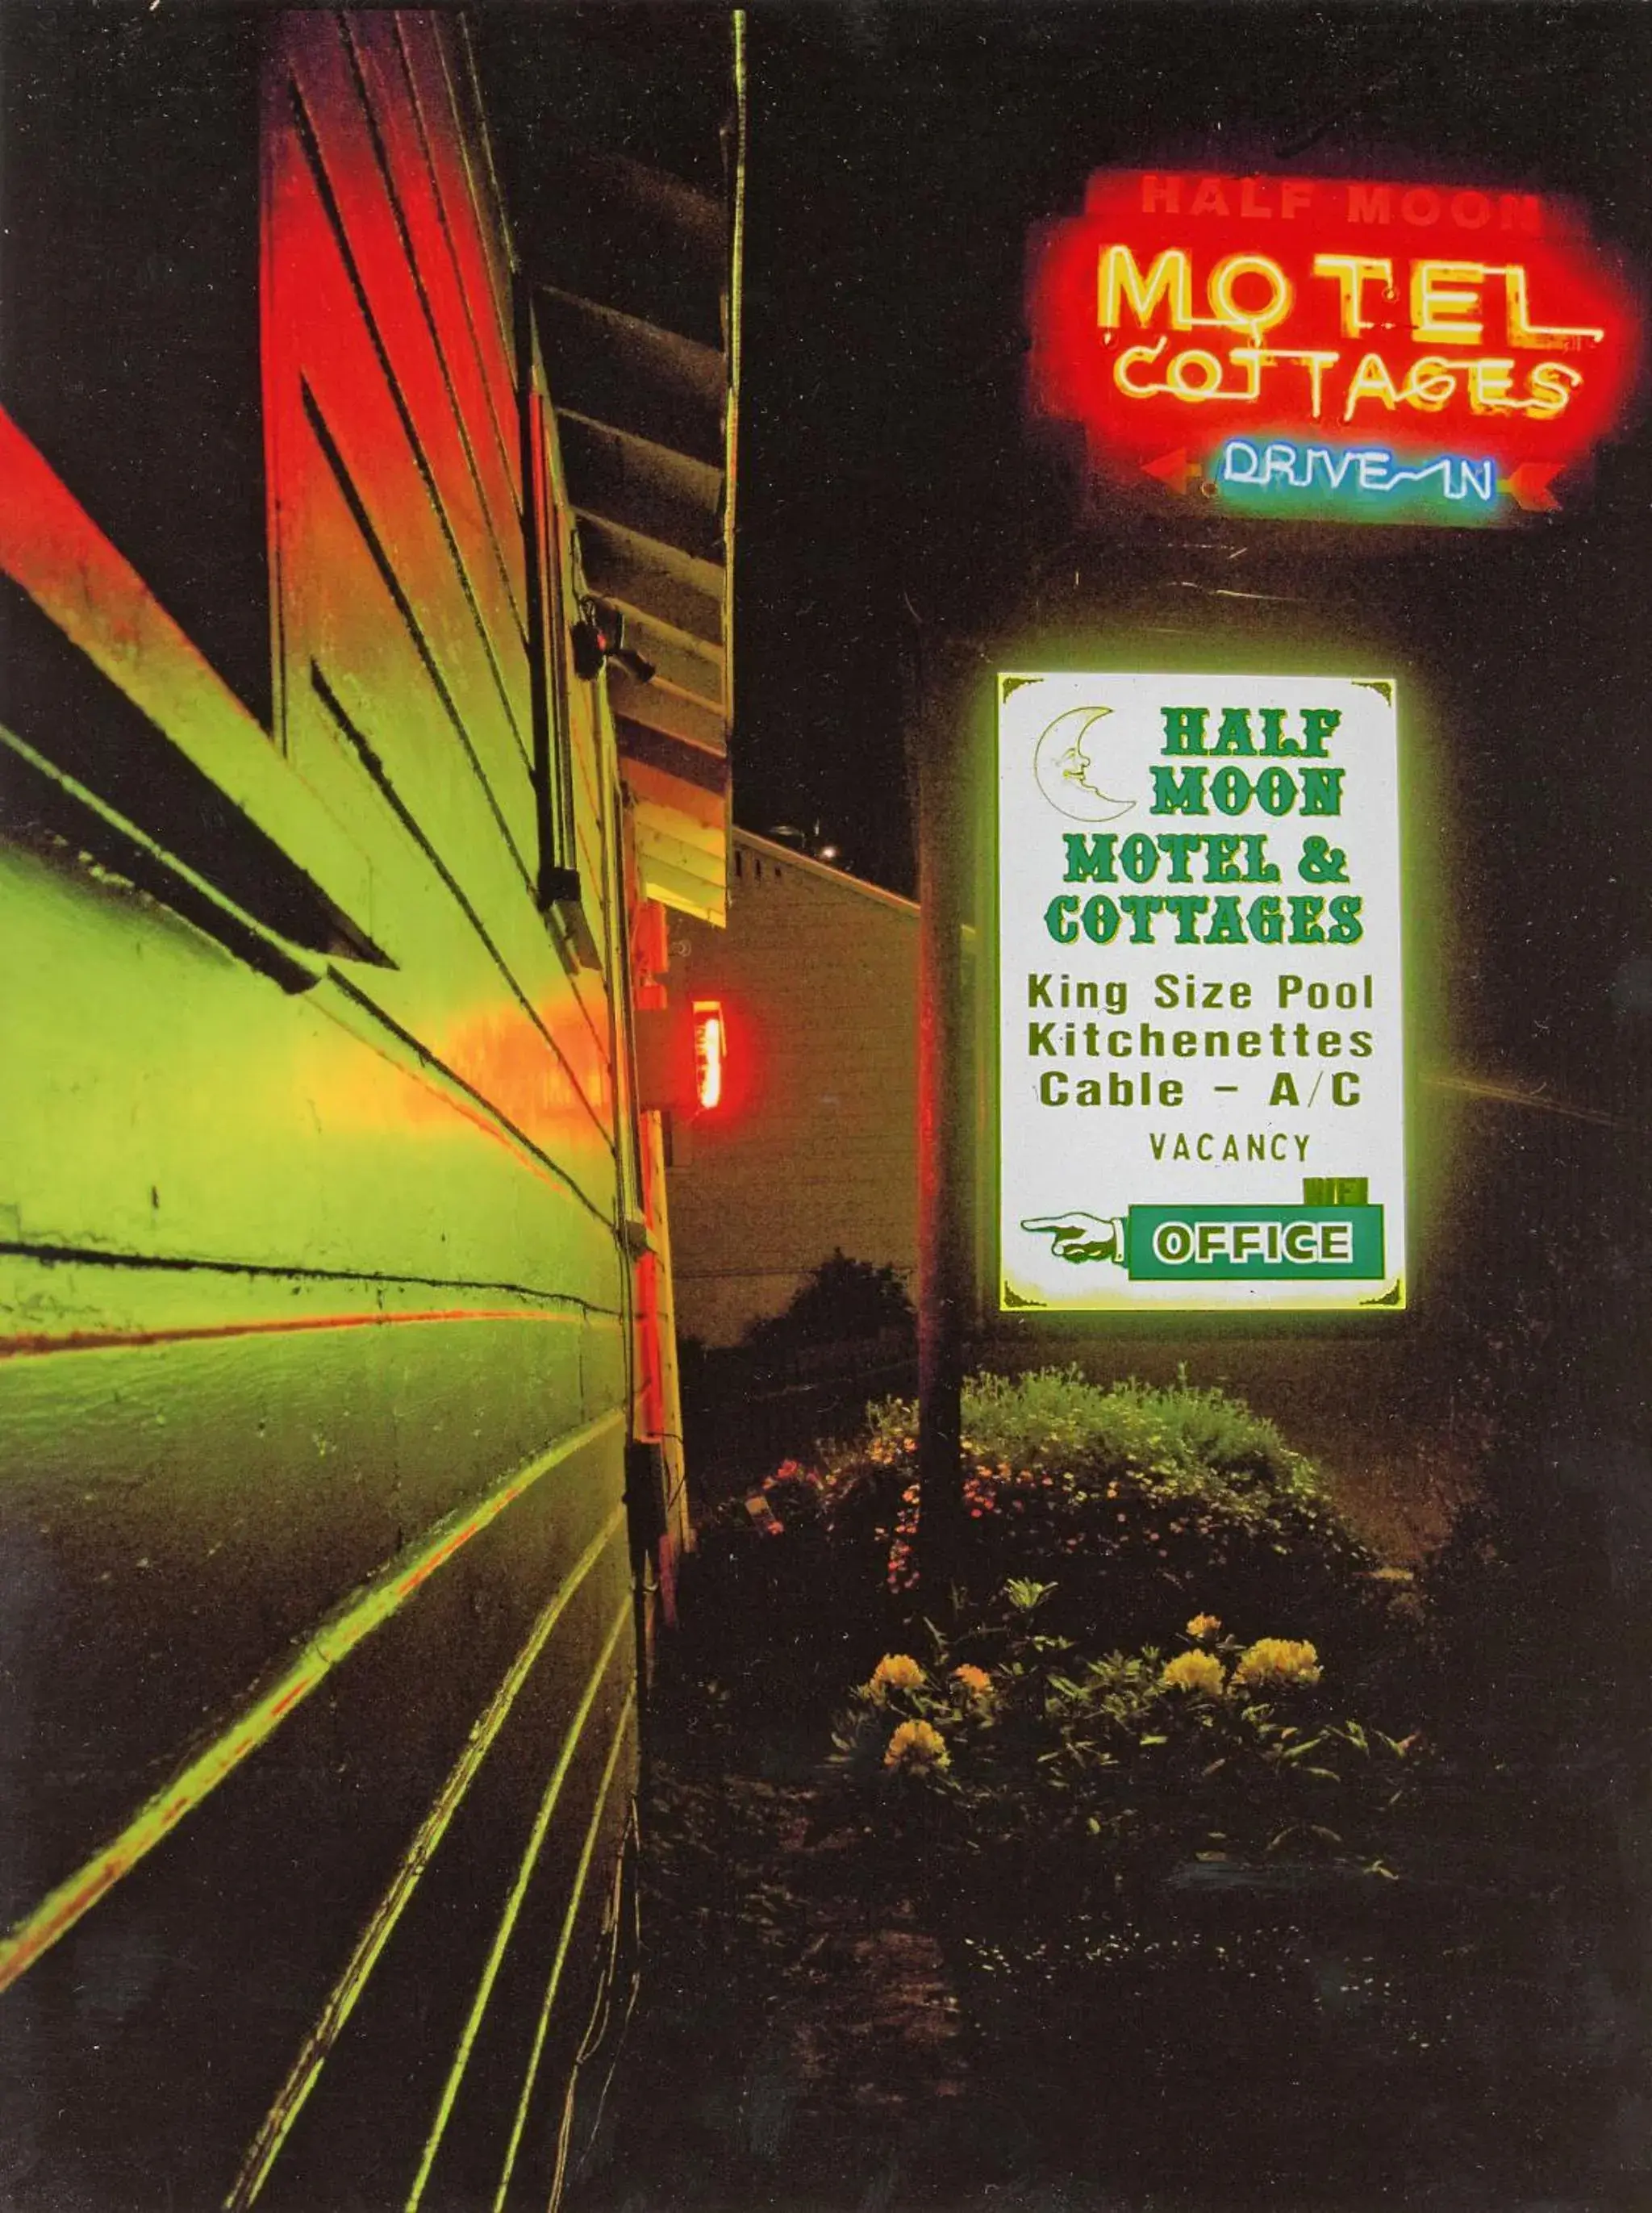 Night in Half Moon Motel & Cottages